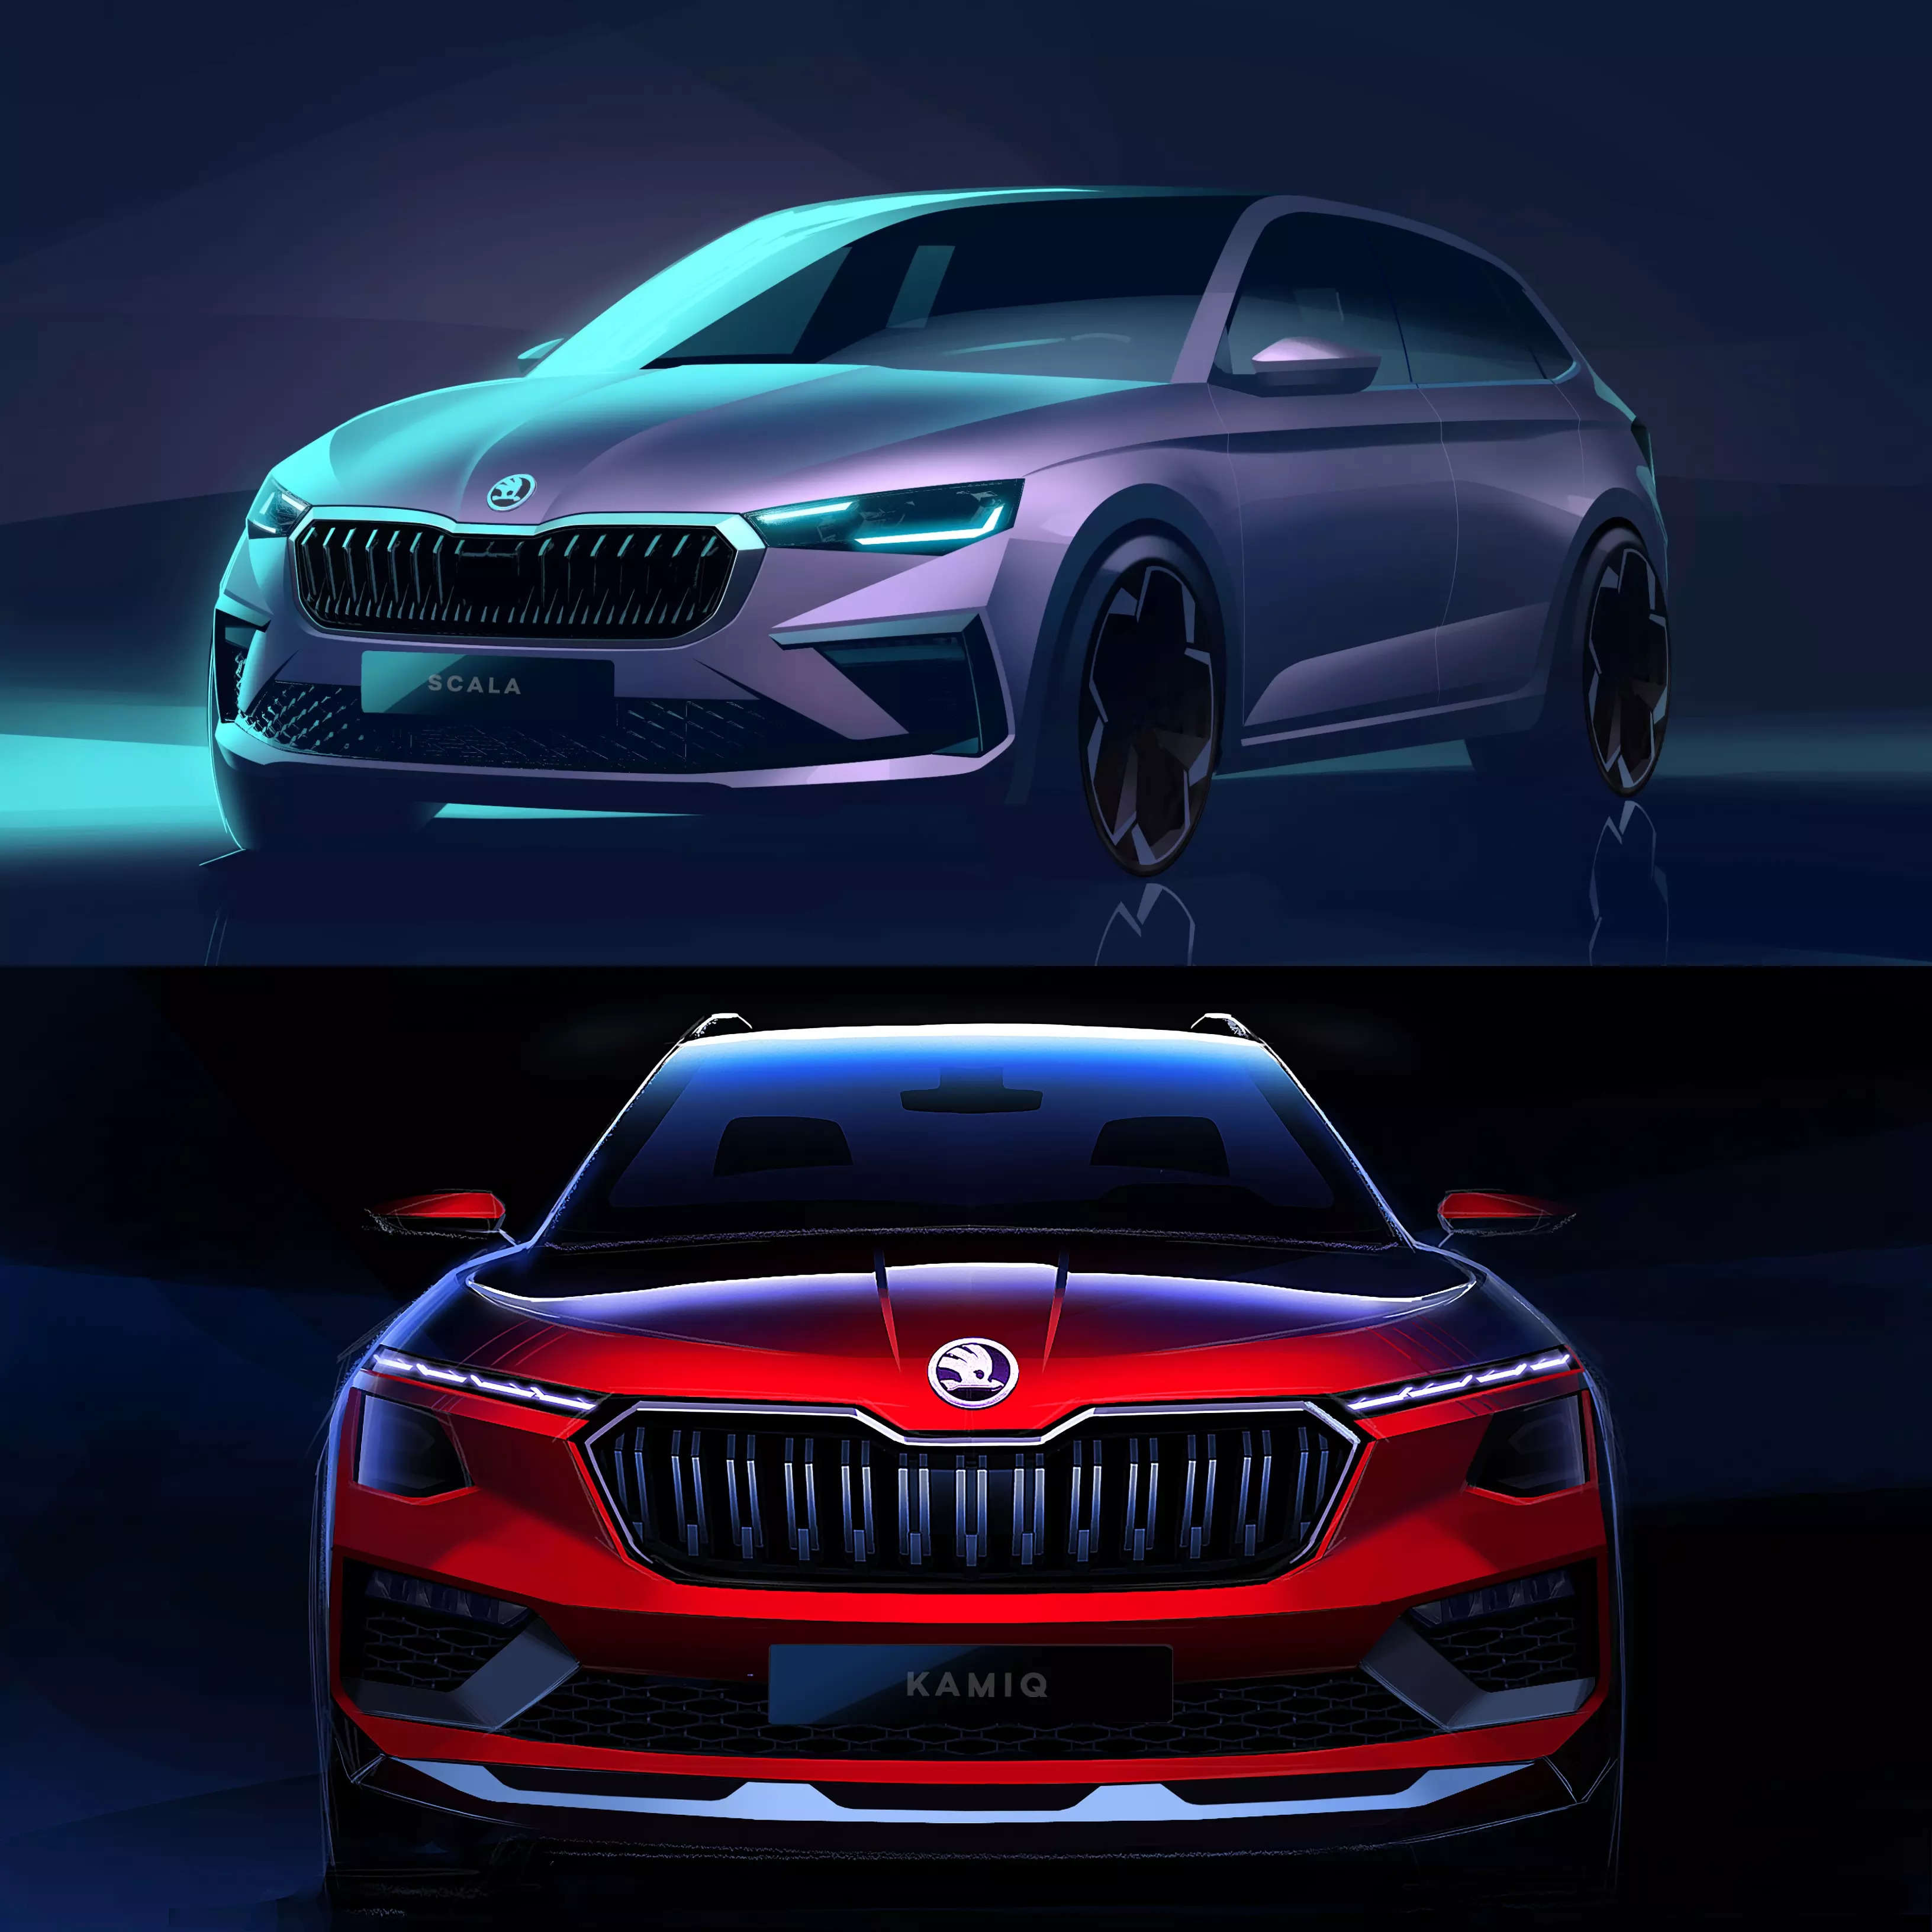 Skoda reveals the first glimpse of the refreshed Scala and Kamiq, ET Auto